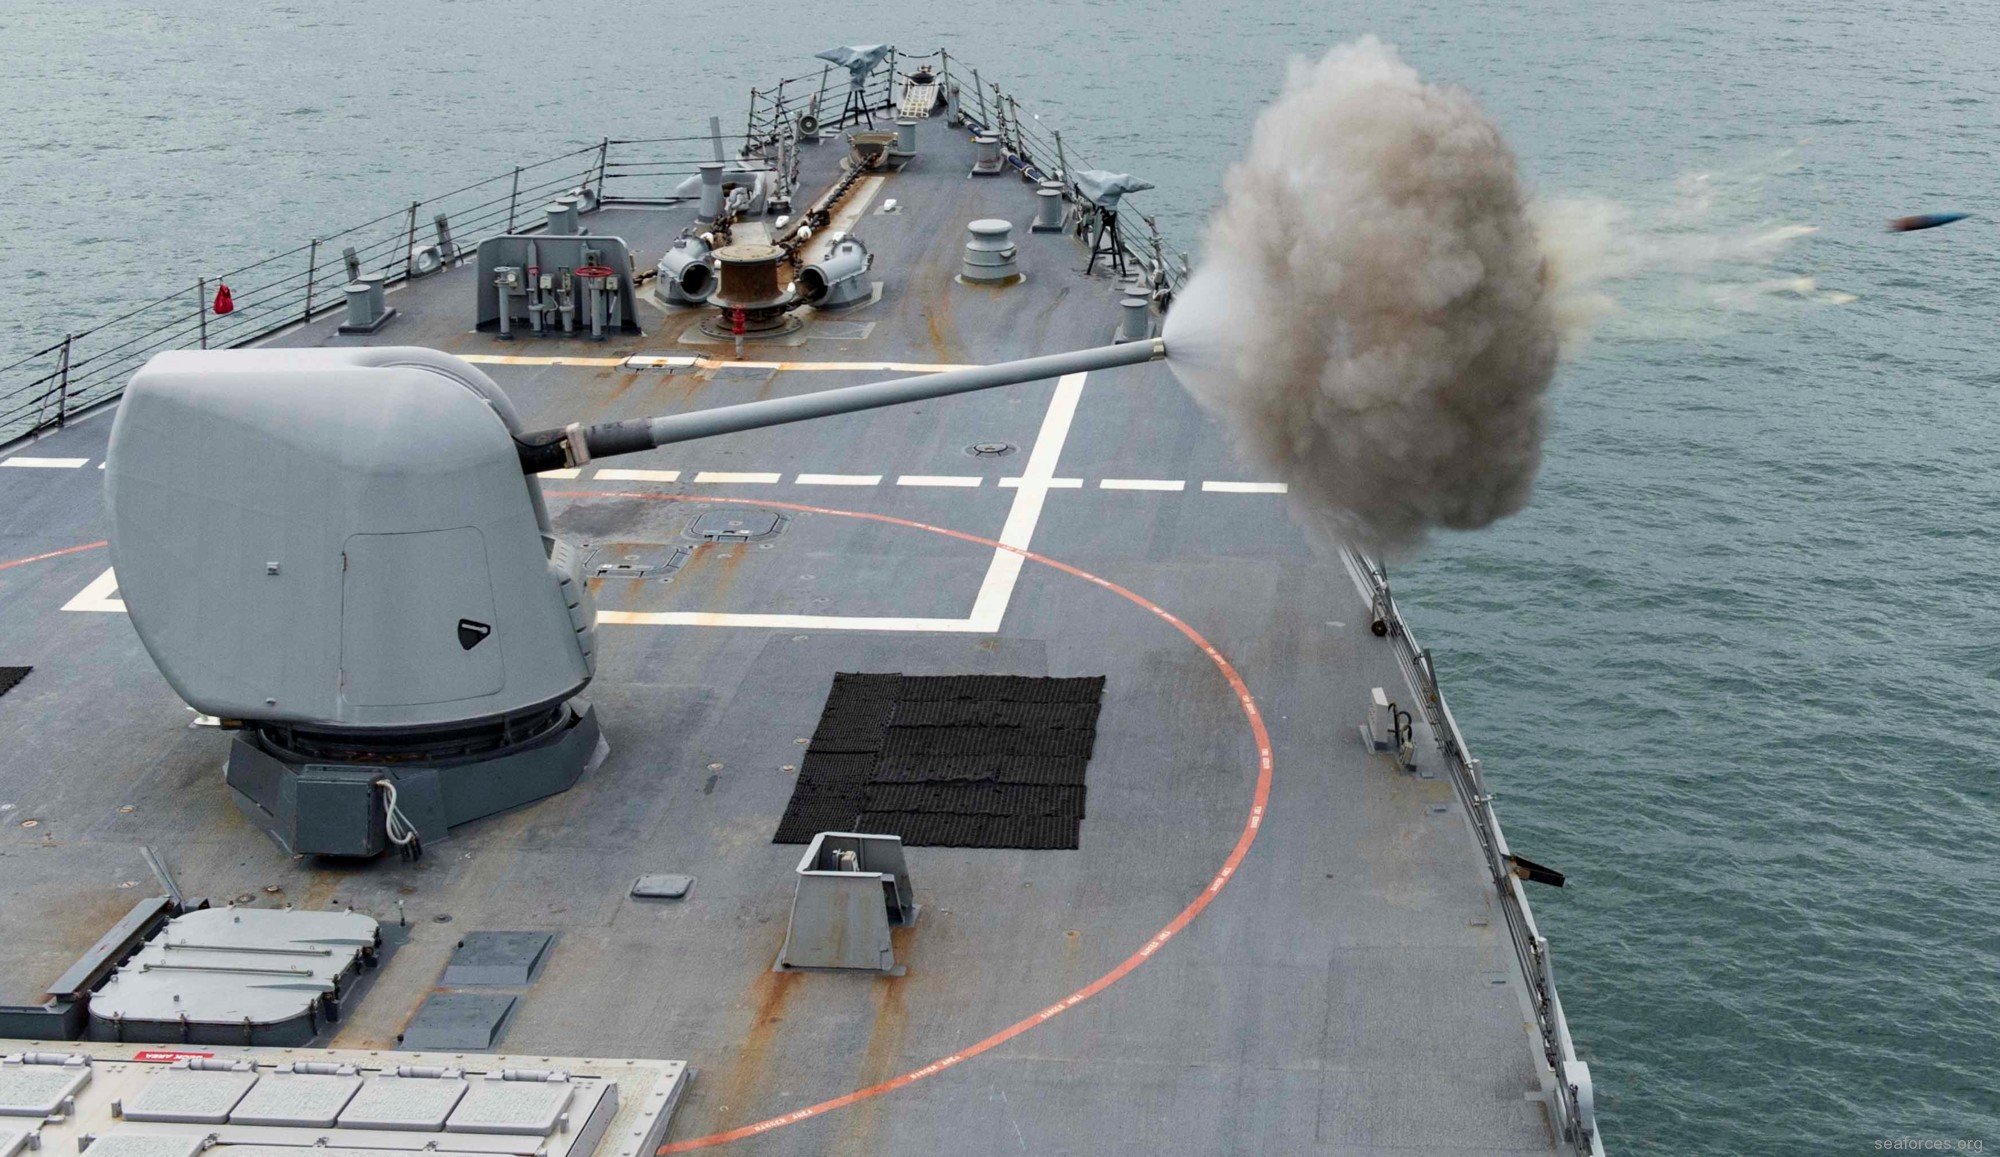 ddg-55 uss stout guided missile destroyer us navy 17 mk-45 5"/54 gun fire exercise